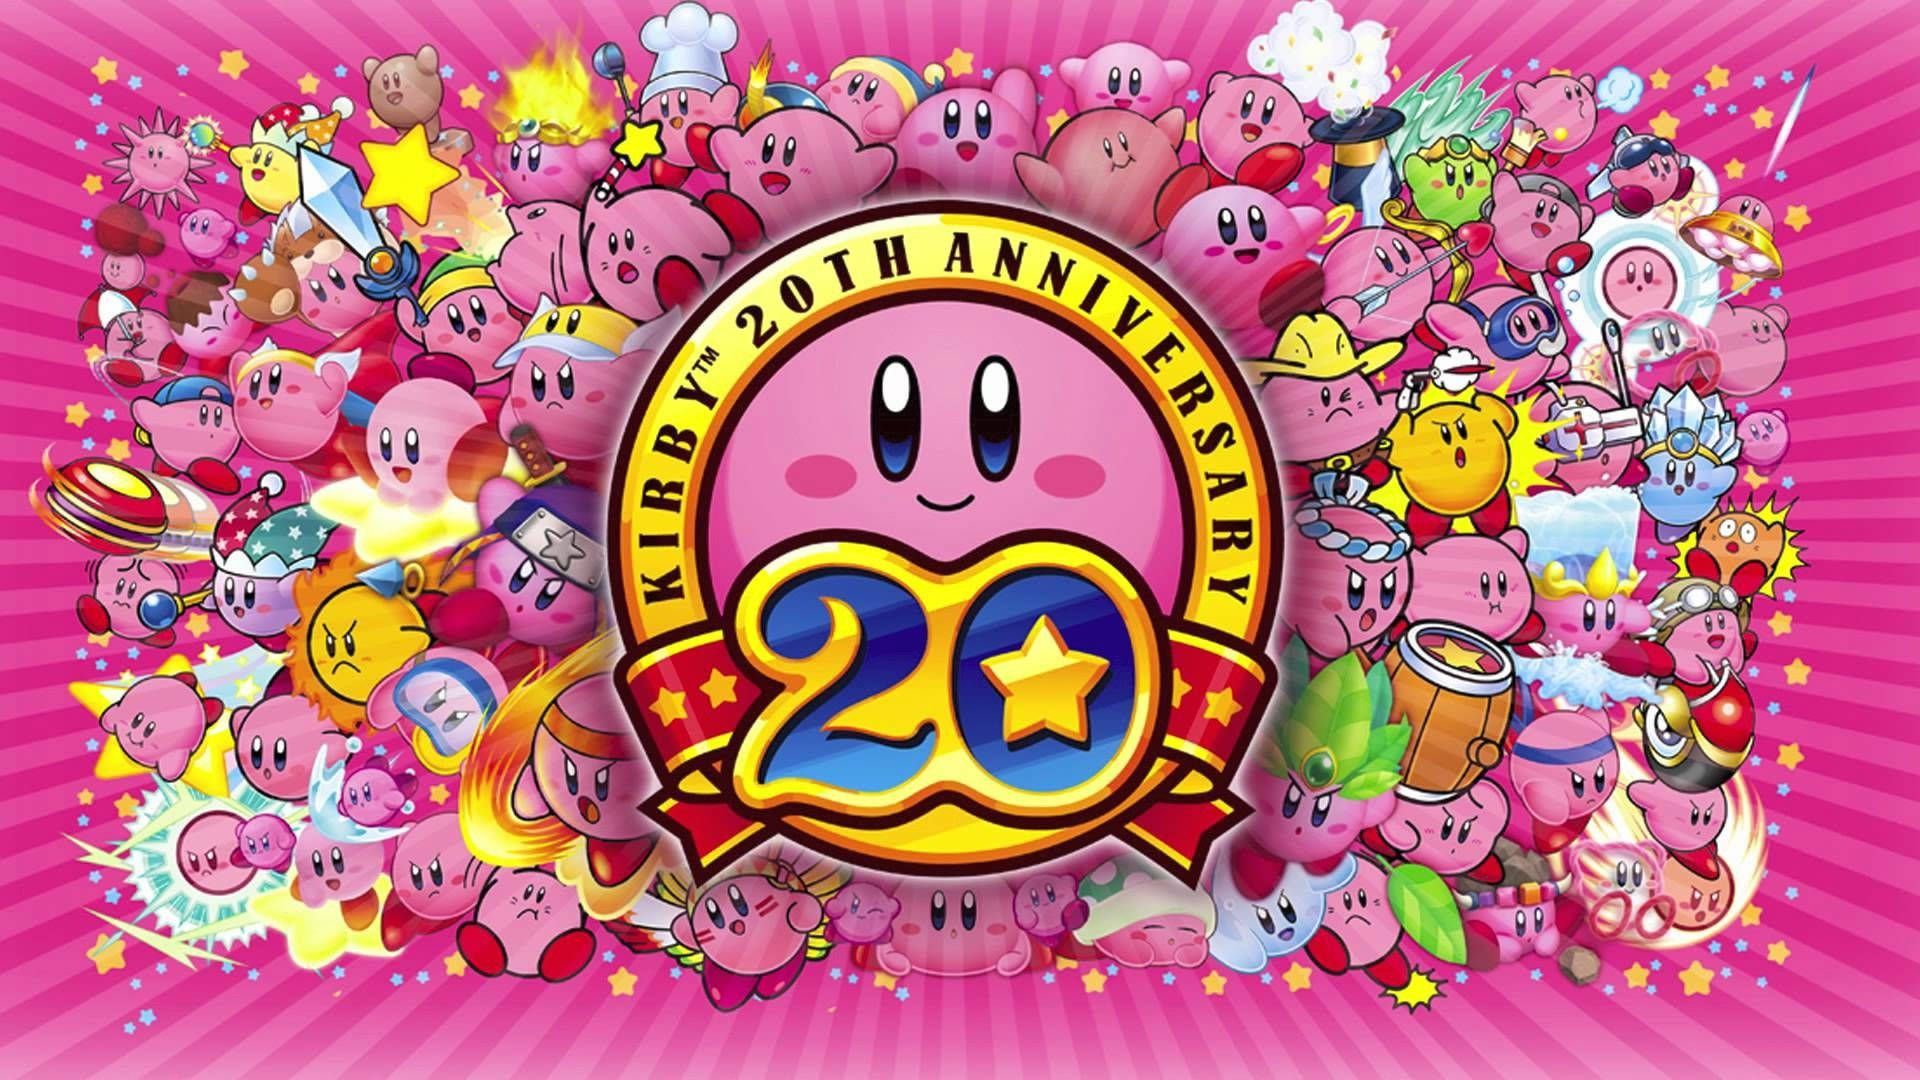 Kirby Celebrates 25th Anniversary with a Festive Cake Wallpaper